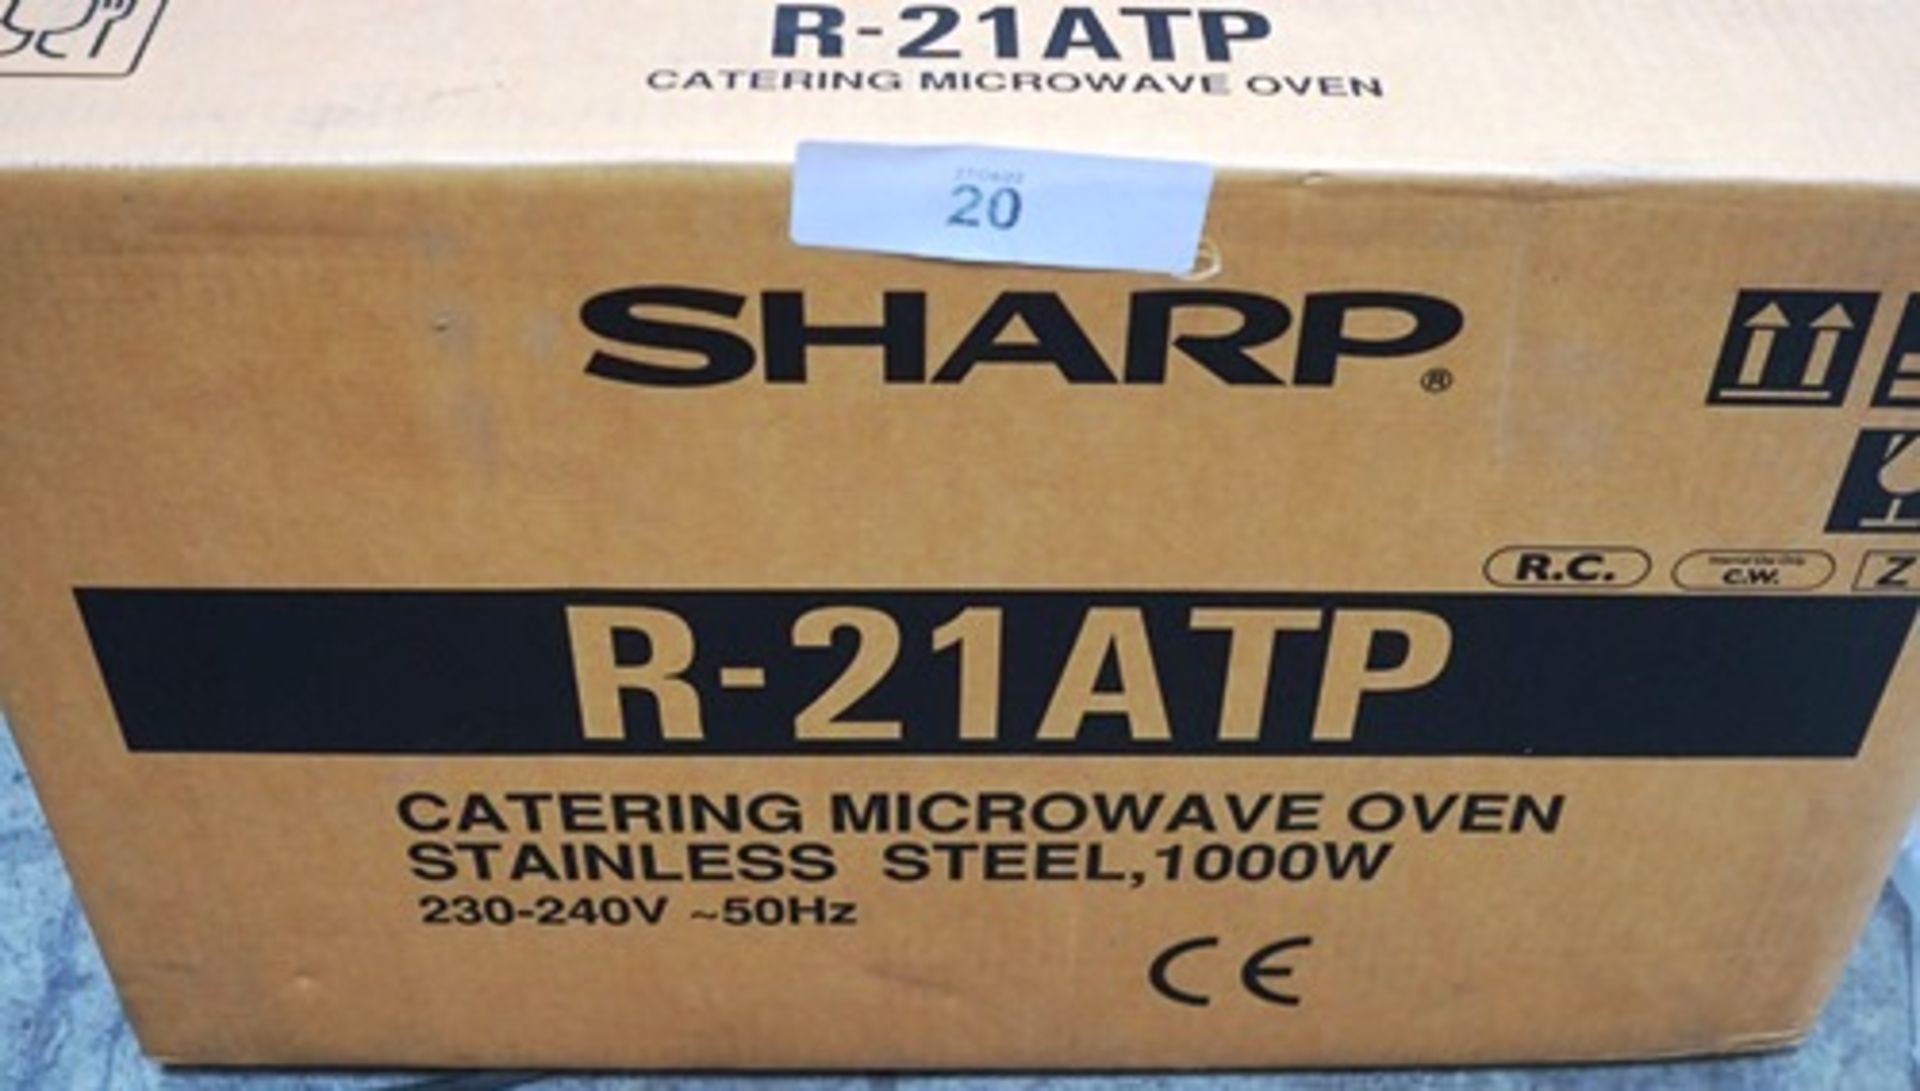 1 x Sharp R-21ATP 1000W commercial microwave, model MIC003R-21ATP - Sealed new in box (ES2)